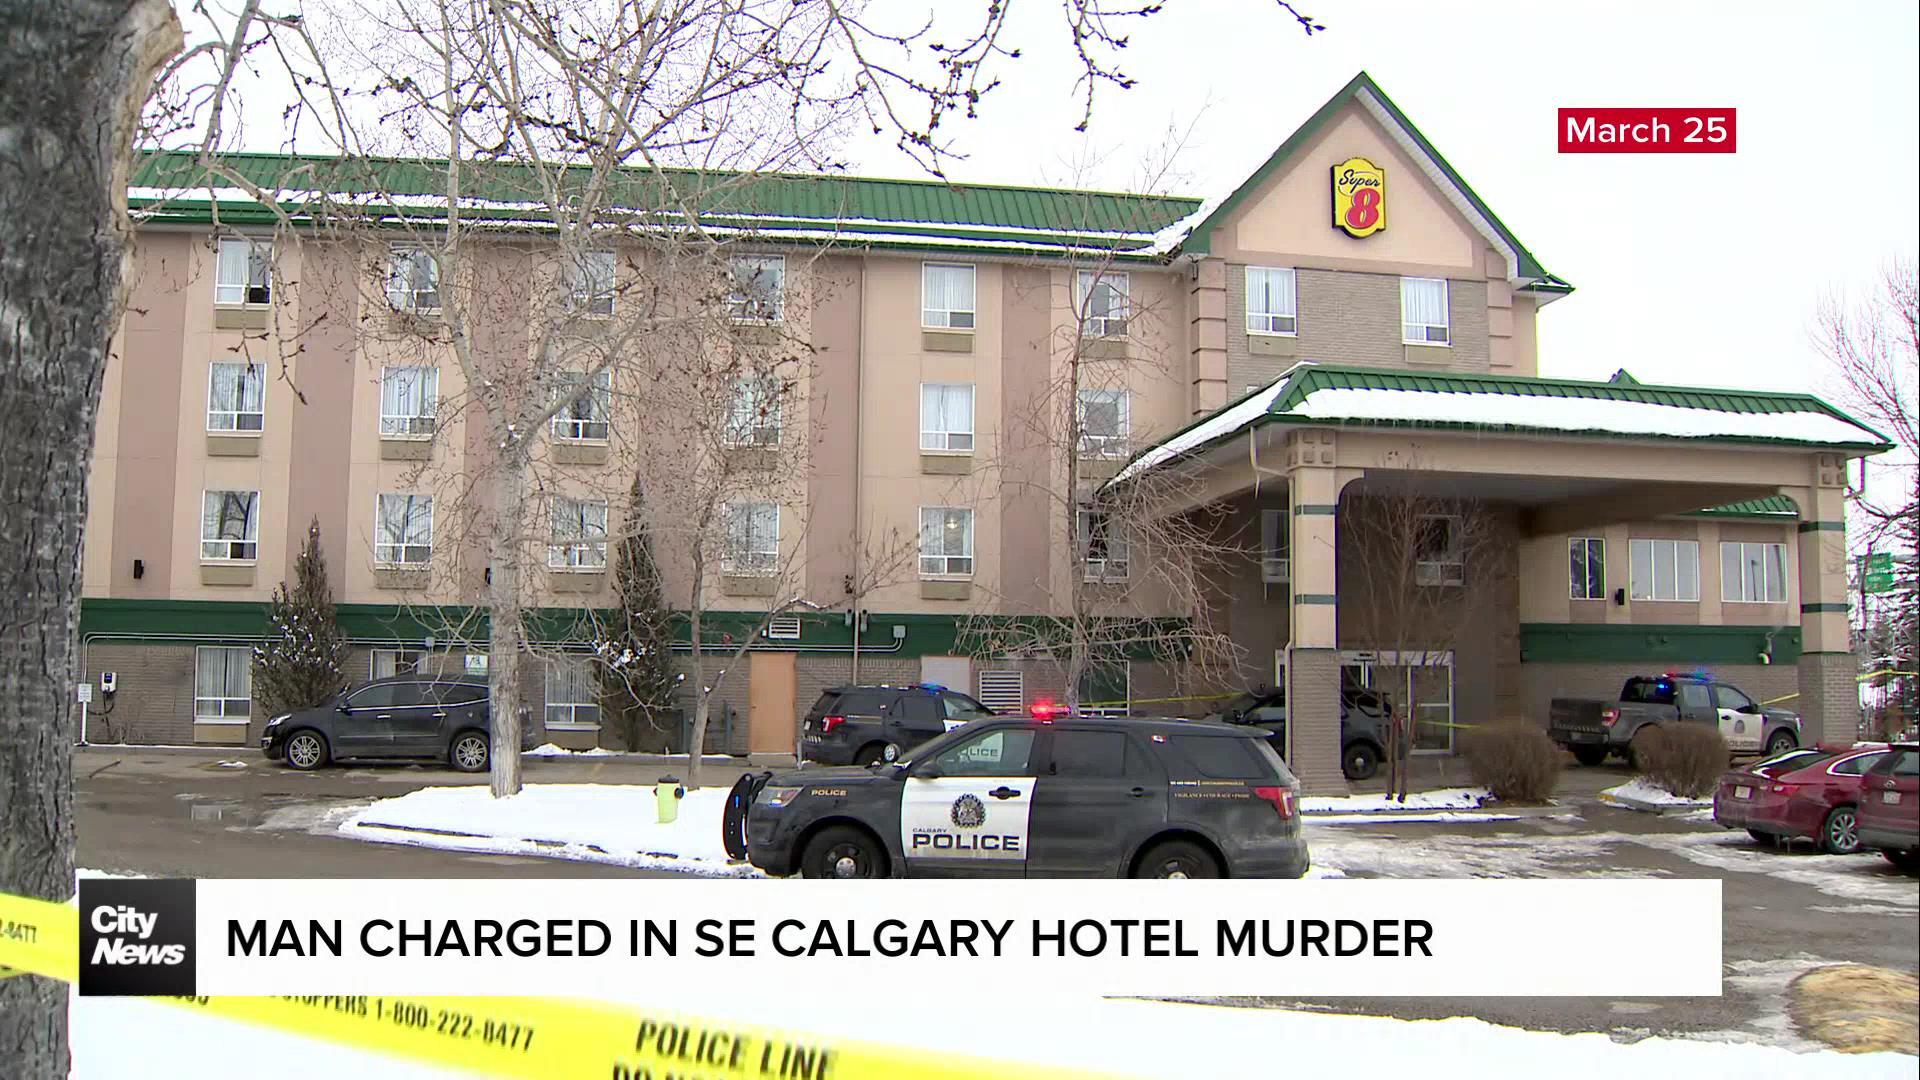 Man charged in SE Calgary hotel murder